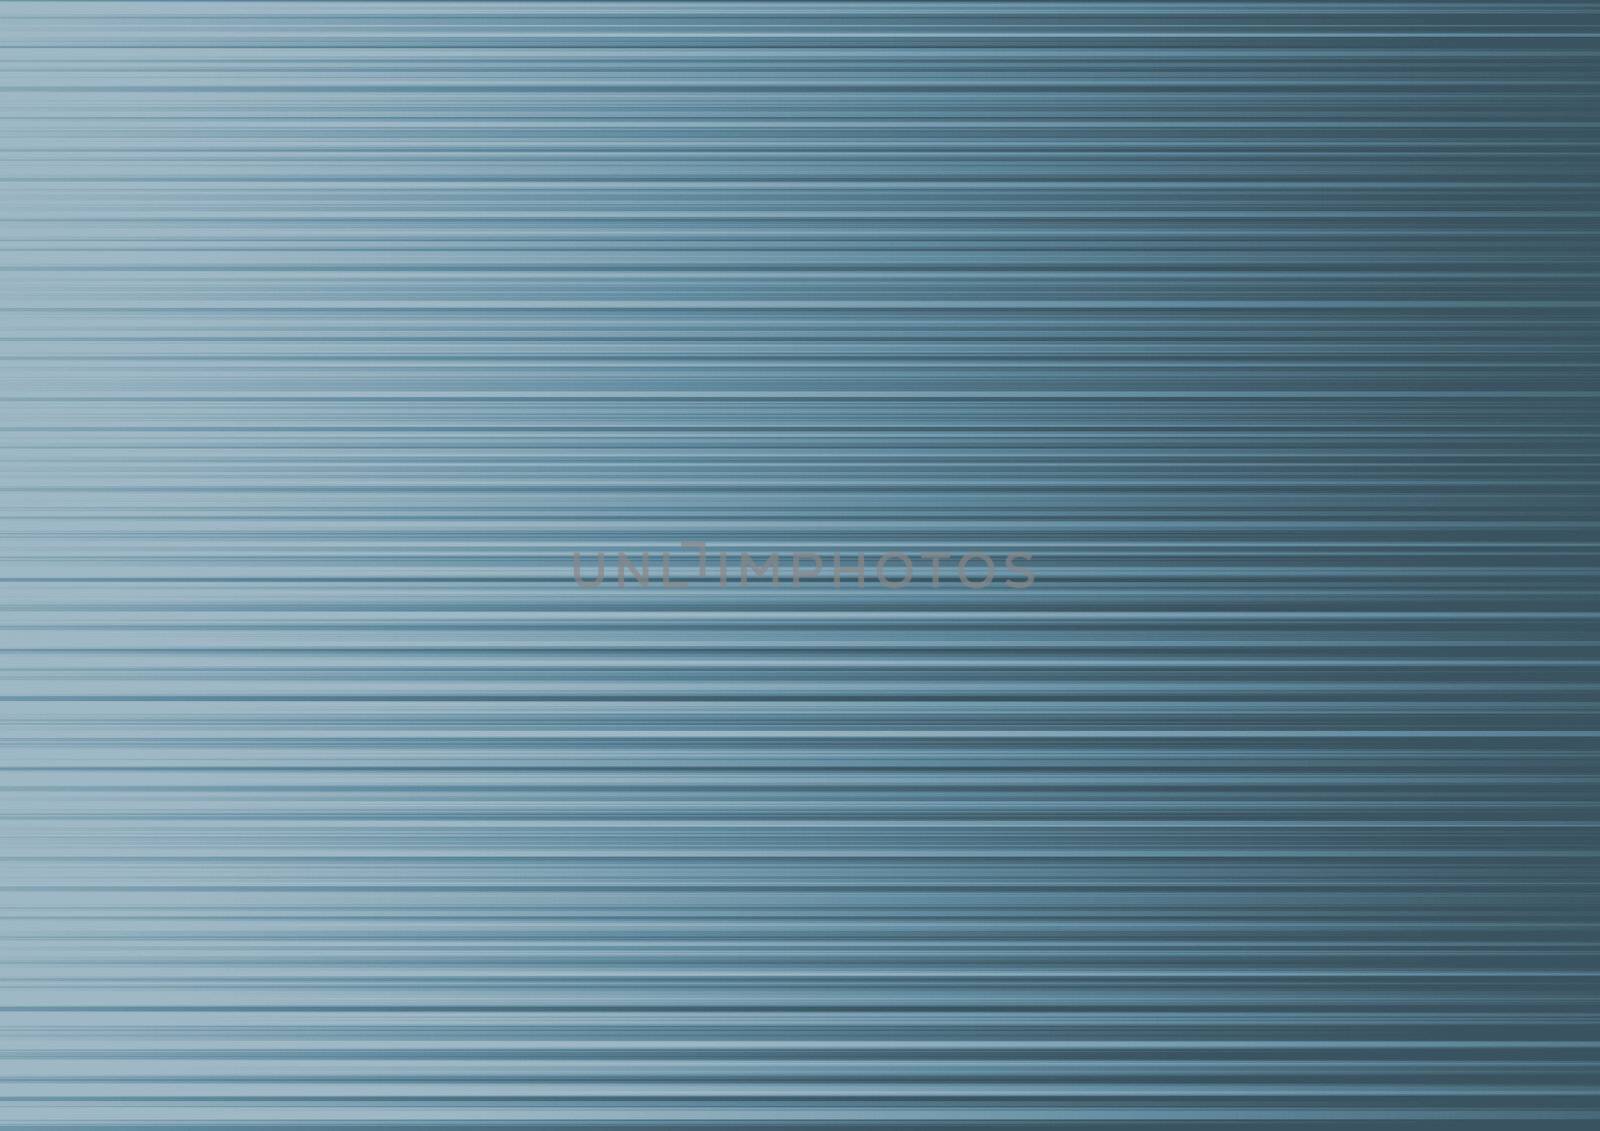 Abstract blue bright striped background with strip